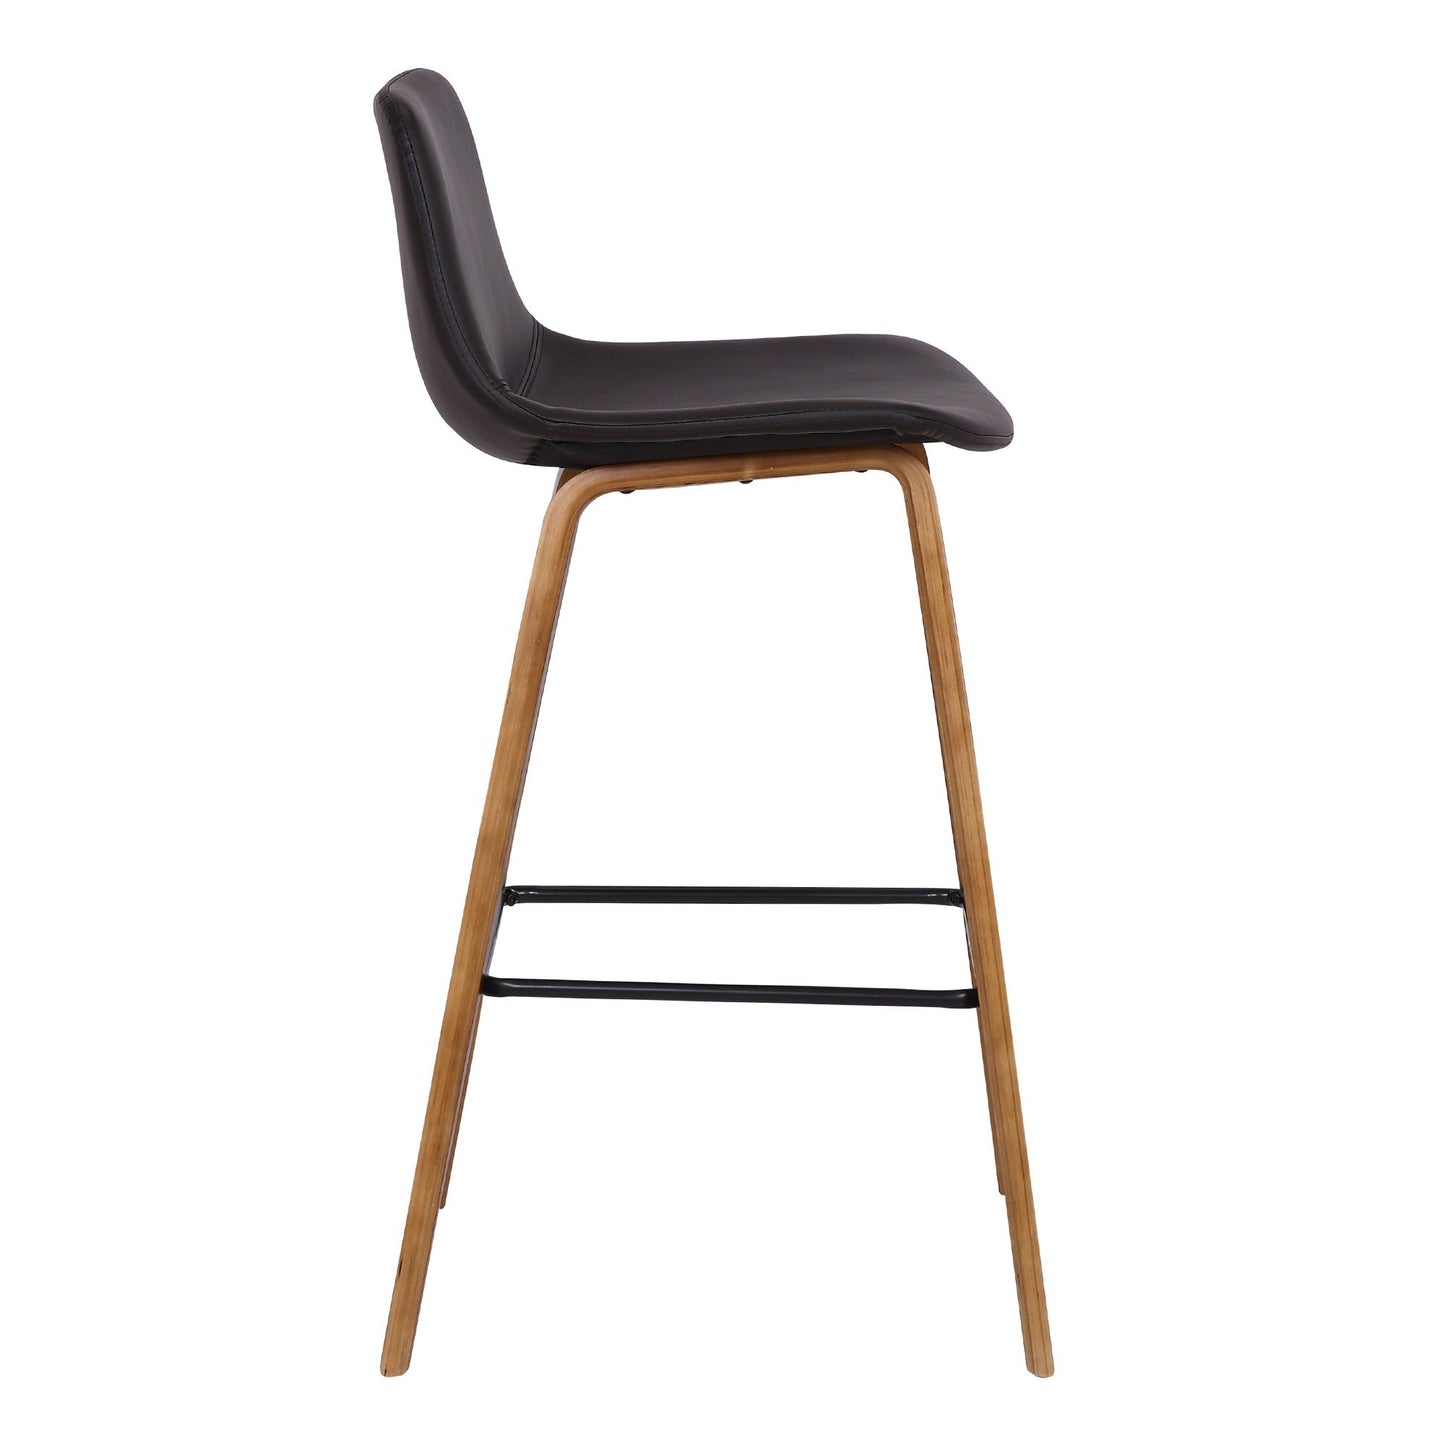 35 Inch Wooden Bar Stool with Leatherette Seat